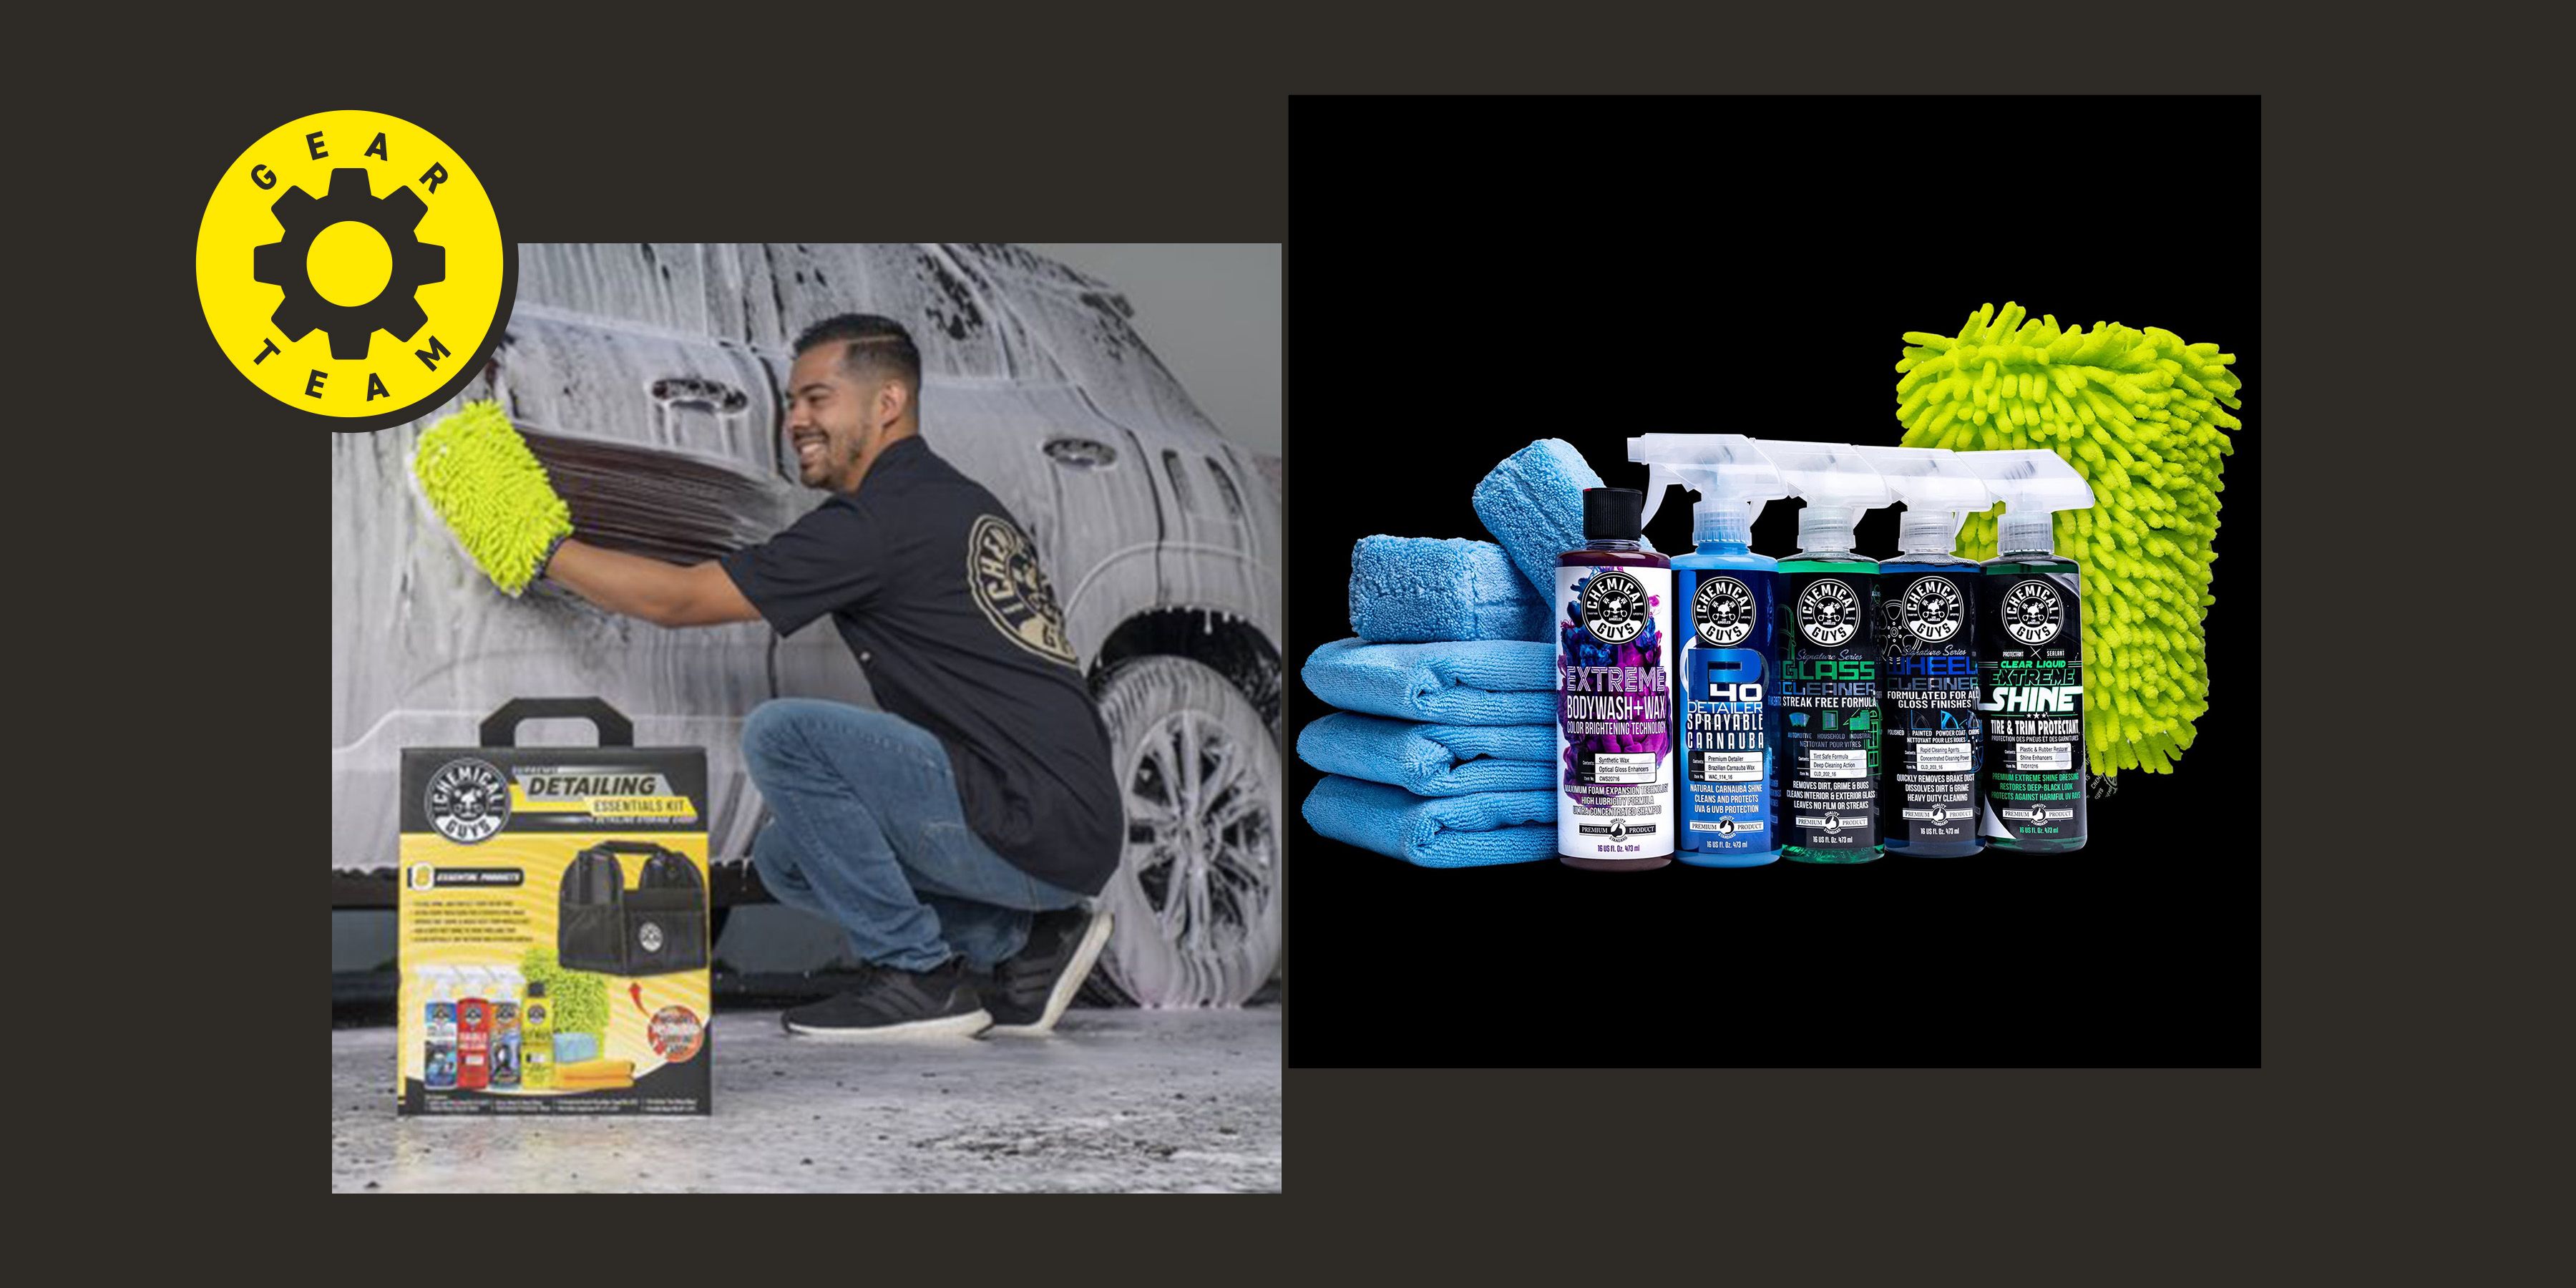 Deal Alert: Save up to 66% on Car Cleaning Kits - Autoweek